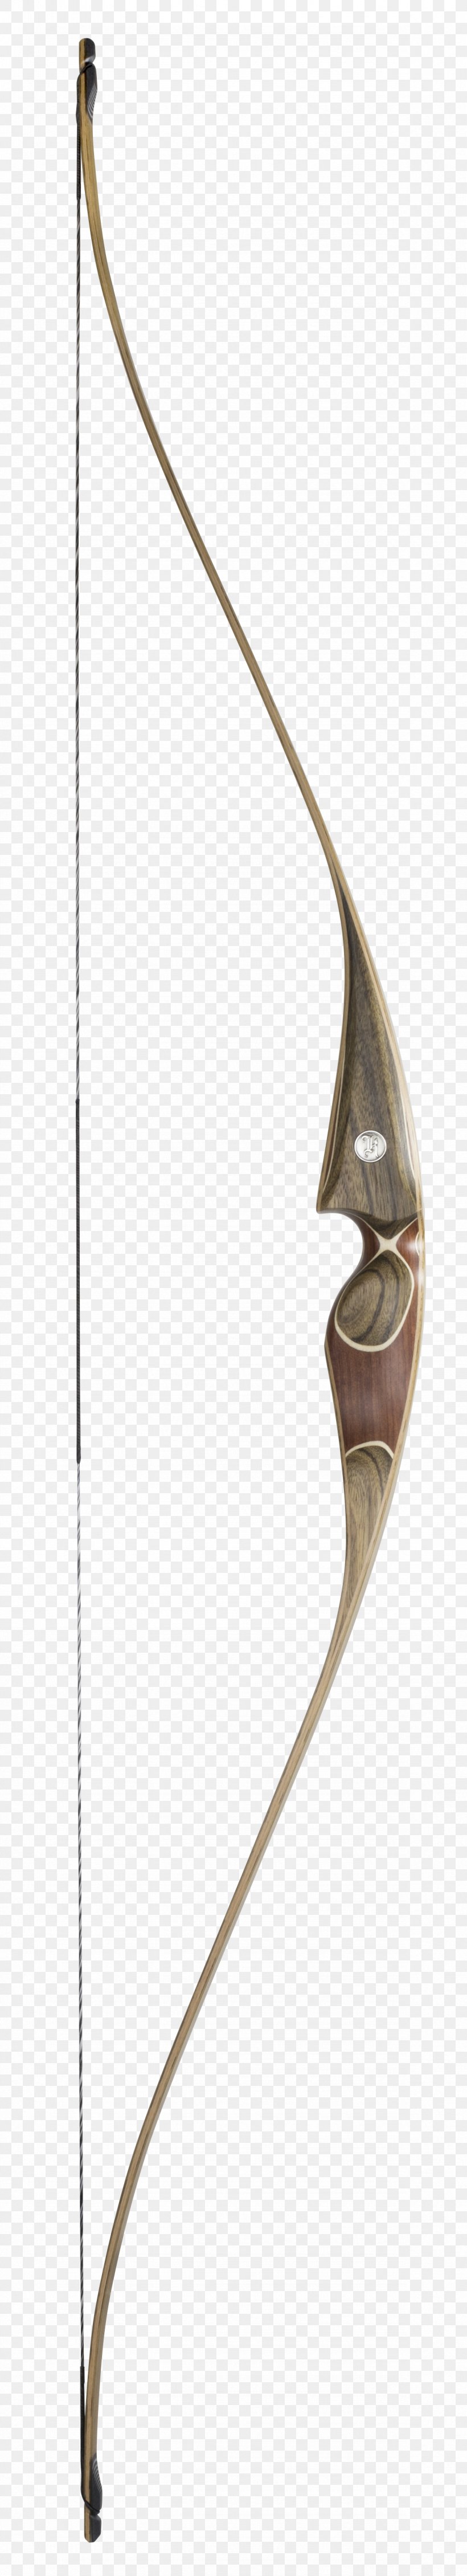 Longbow Archery Bow And Arrow Recurve Bow, PNG, 1177x6489px, Longbow, Archery, Bow, Bow And Arrow, Chambord Download Free